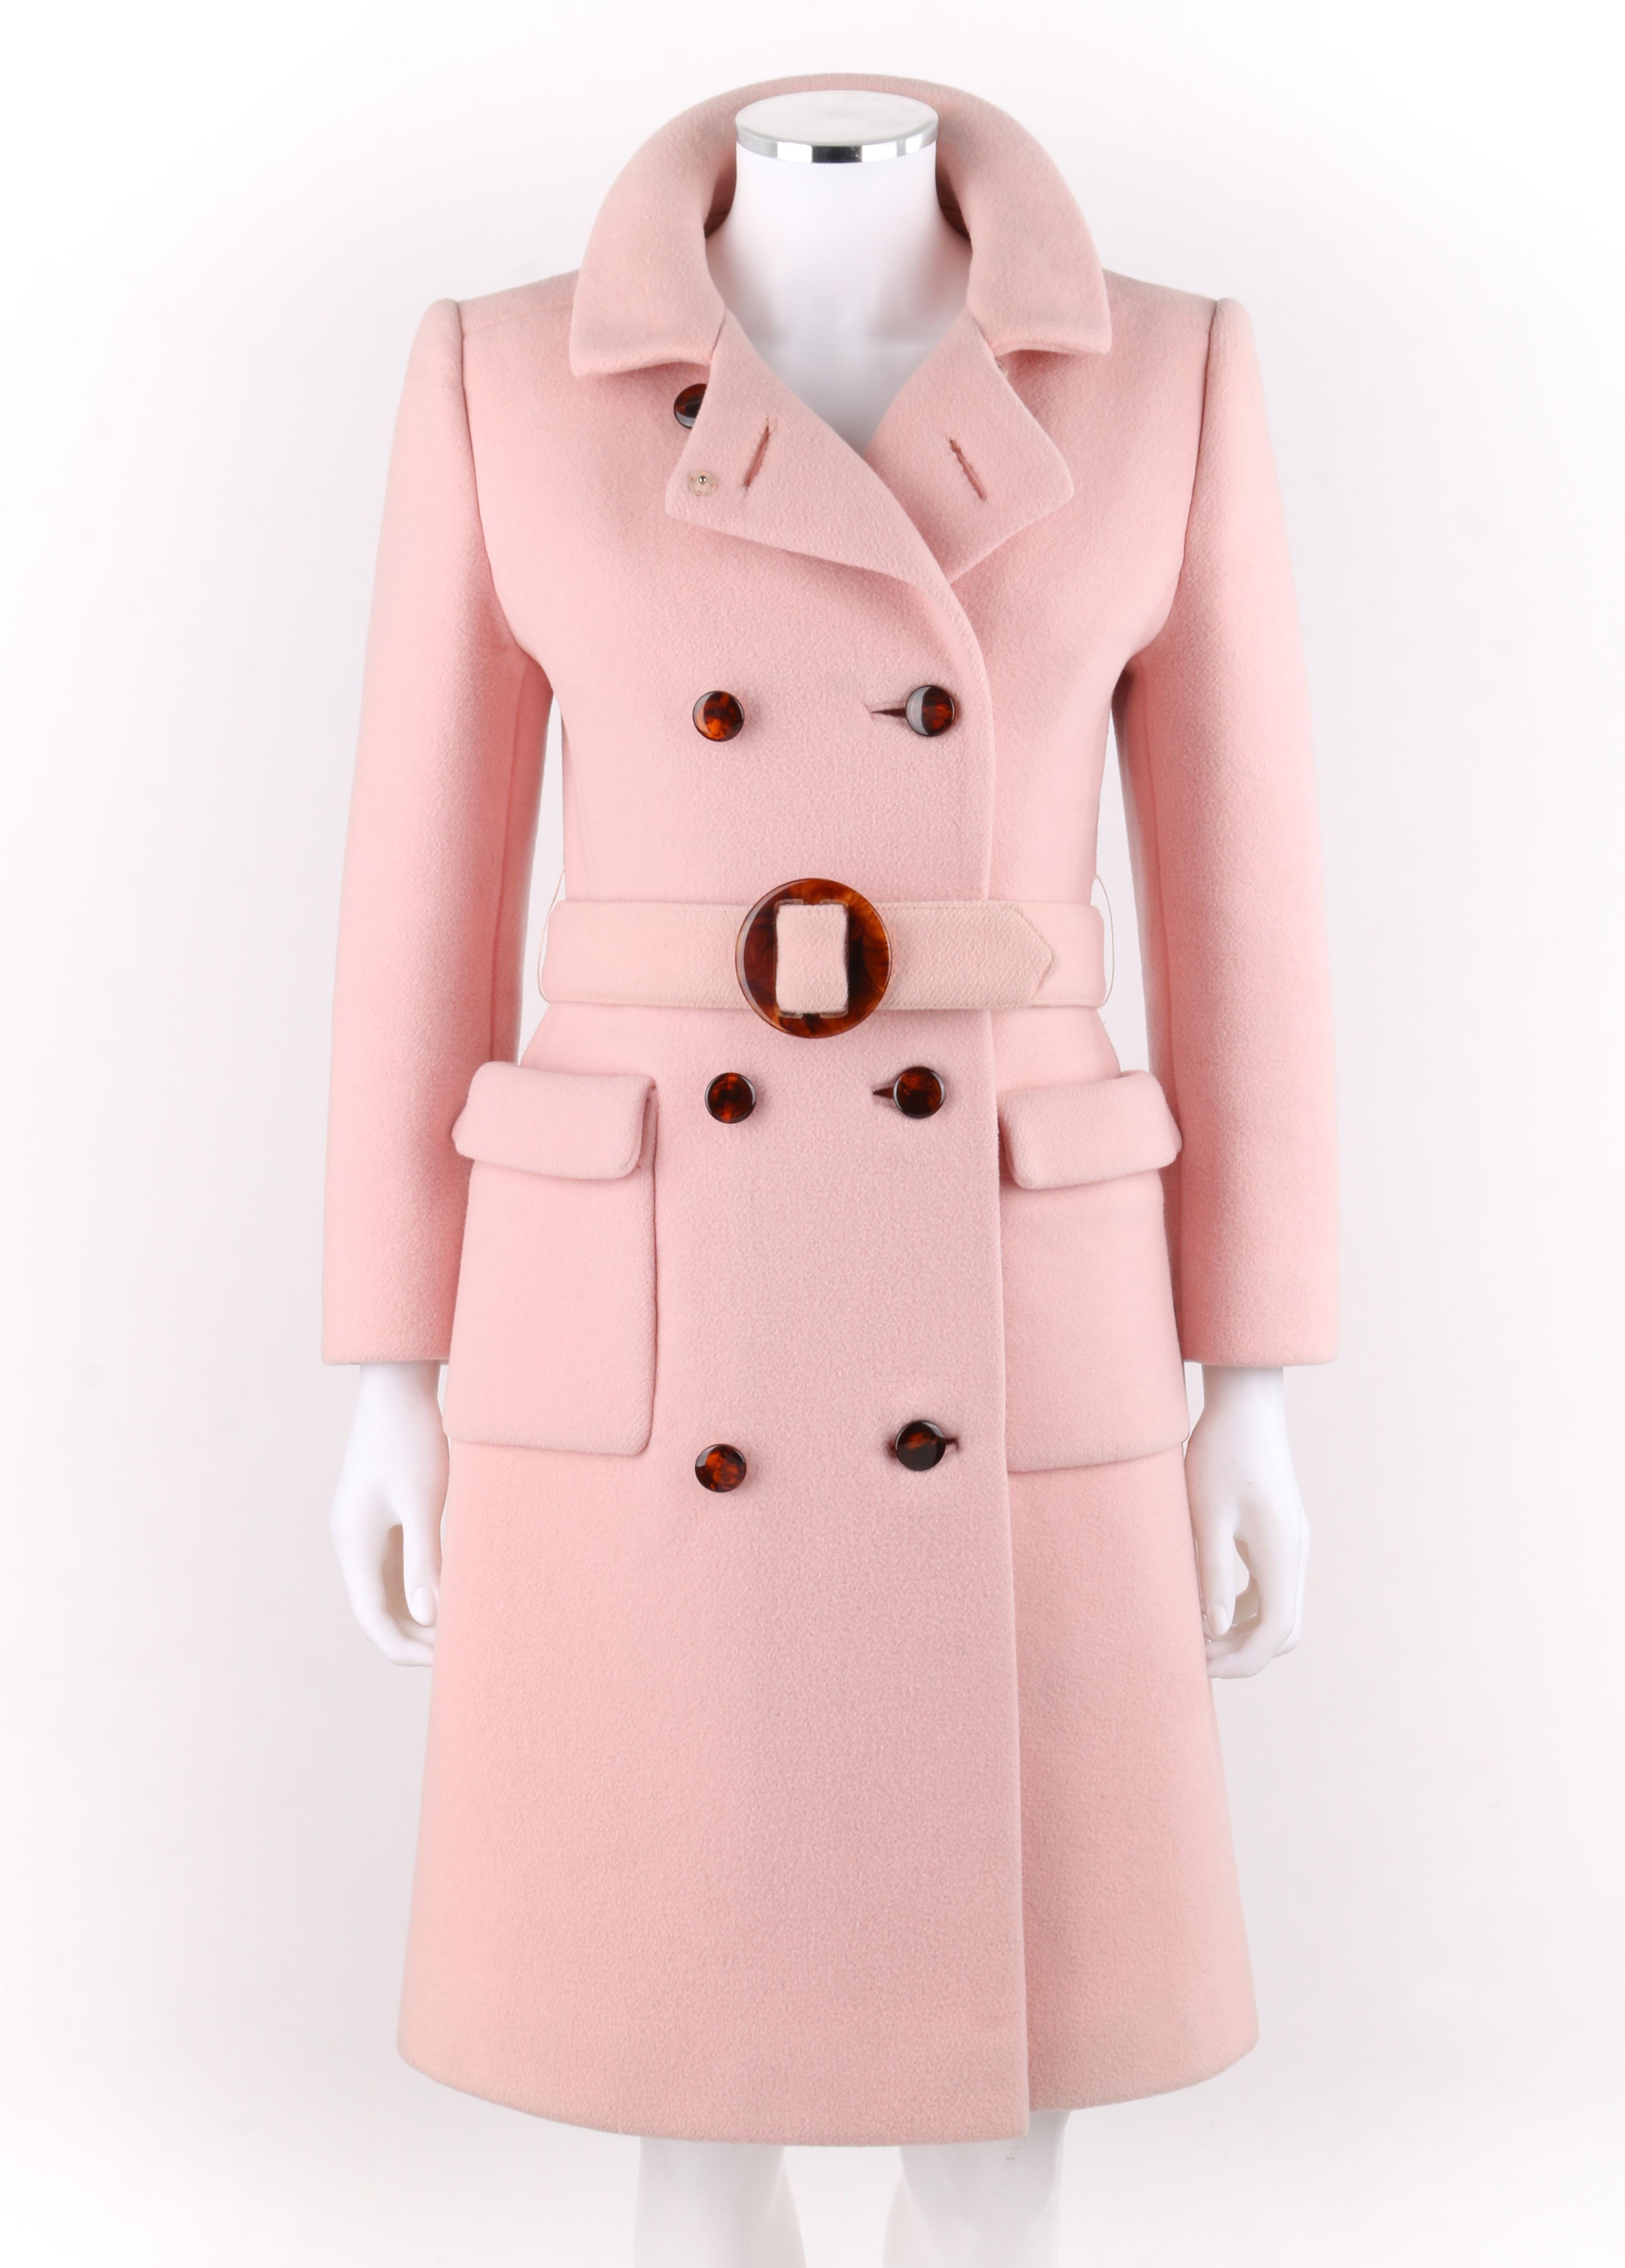 CALVIN KLEIN c.1960’s Mod Soft Pink Wool Tortoise Shell Belted Top Coat (Early Work)
 
Circa: Late 1960’s
Label(s): Calvin Klein / Boston Store / Milwaukee Wisconsin / ILGWU   
Style: Top Coat
Color(s): Pink
Lined: Yes
Unmarked Fabric Content: